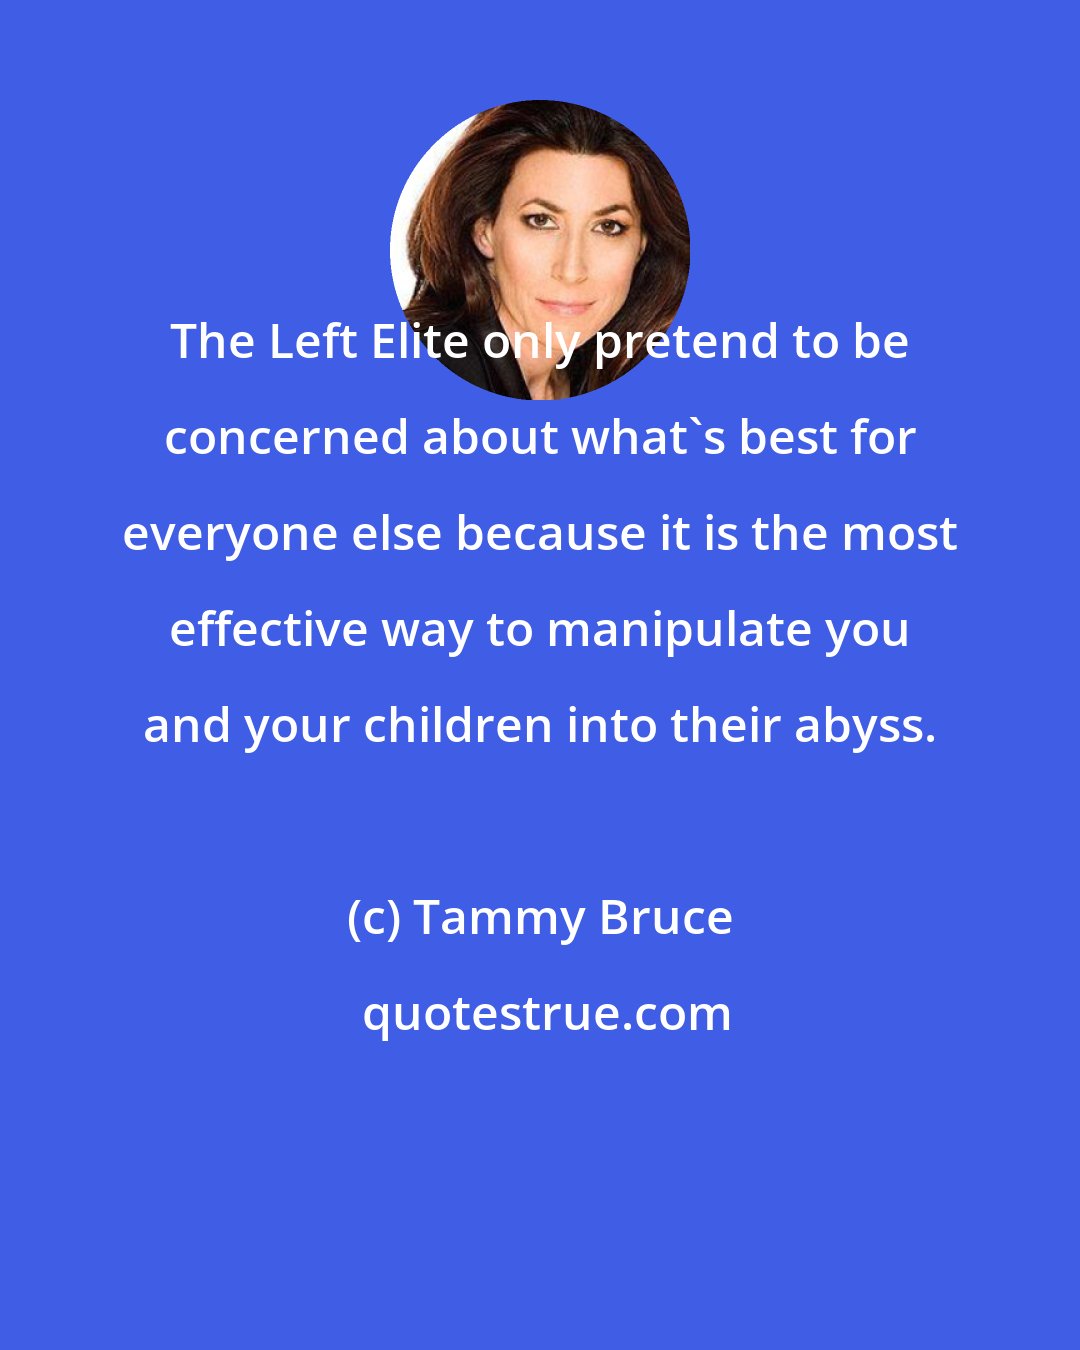 Tammy Bruce: The Left Elite only pretend to be concerned about what's best for everyone else because it is the most effective way to manipulate you and your children into their abyss.